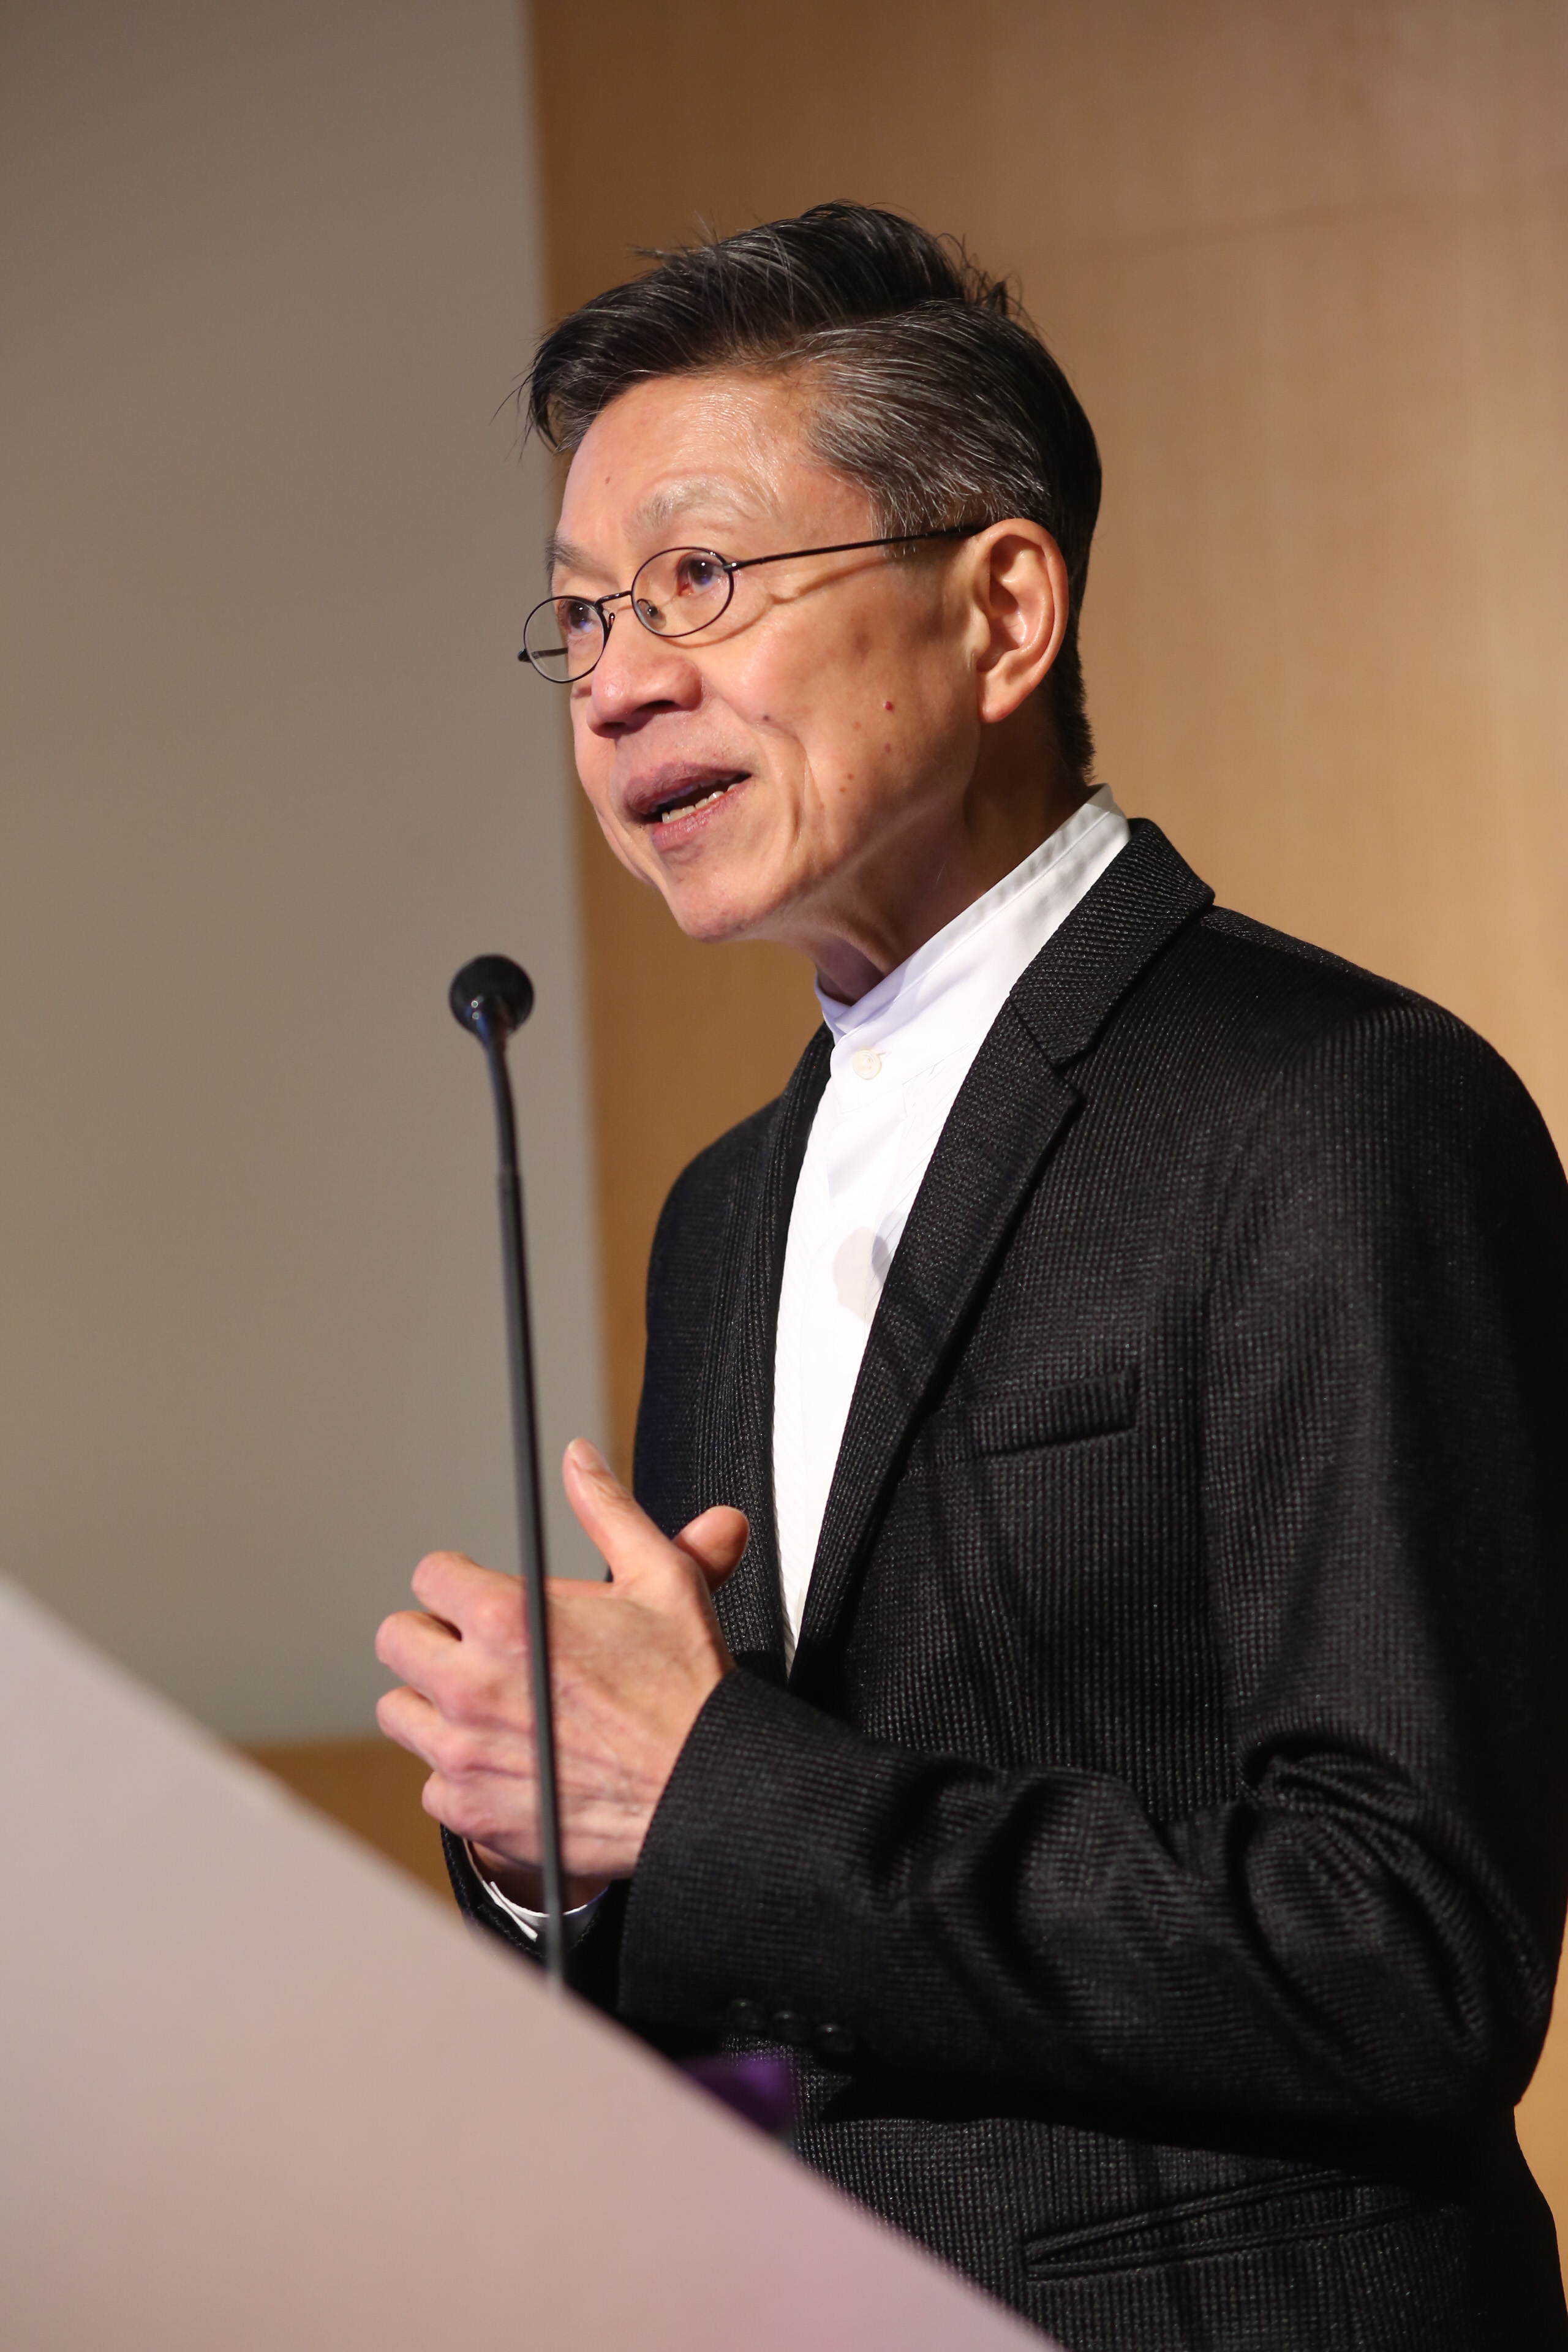 Professor YEOH Eng Kiong, Director of the Jockey Club School of Public Health and Primary Care of the Faculty of Medicine at The Chinese University of Hong Kong (CUHK), delivers a public lecture on “Humanness and Healing in End-of-life Care: Groundings for Morality of Health Systems”, under the Mok Hing Yiu Visiting Professorship Scheme supported by Mok Hing Yiu Charitable Foundation.